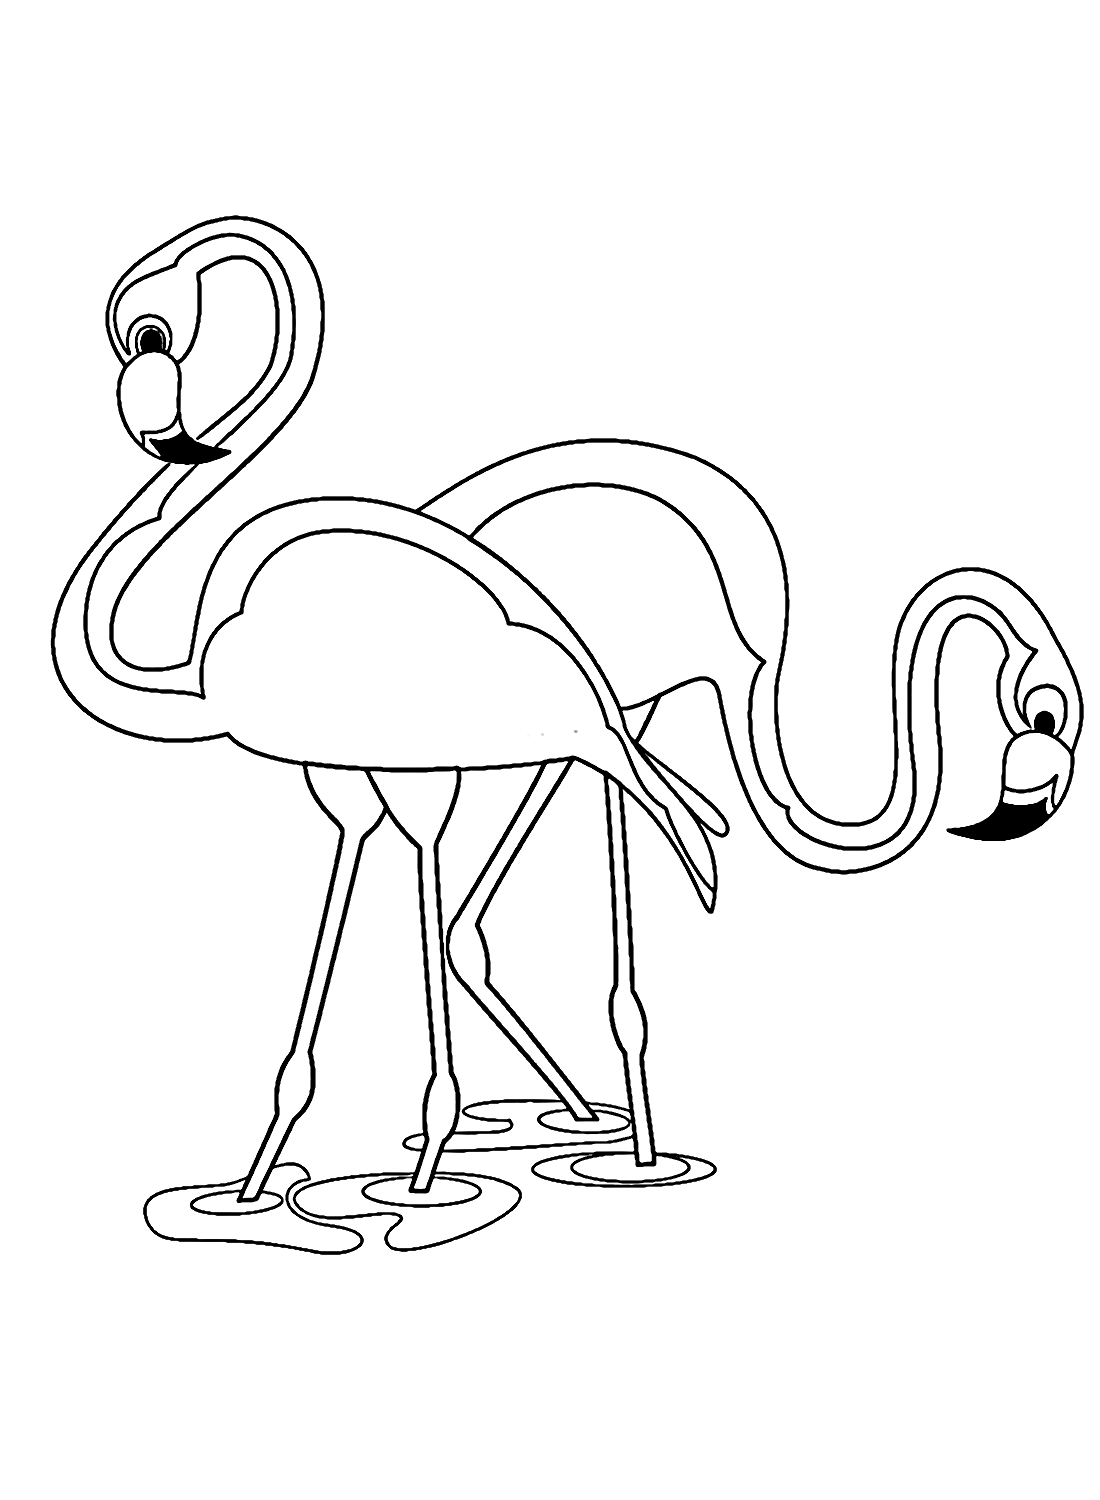 Two Flamingos Looking for Food Coloring Page